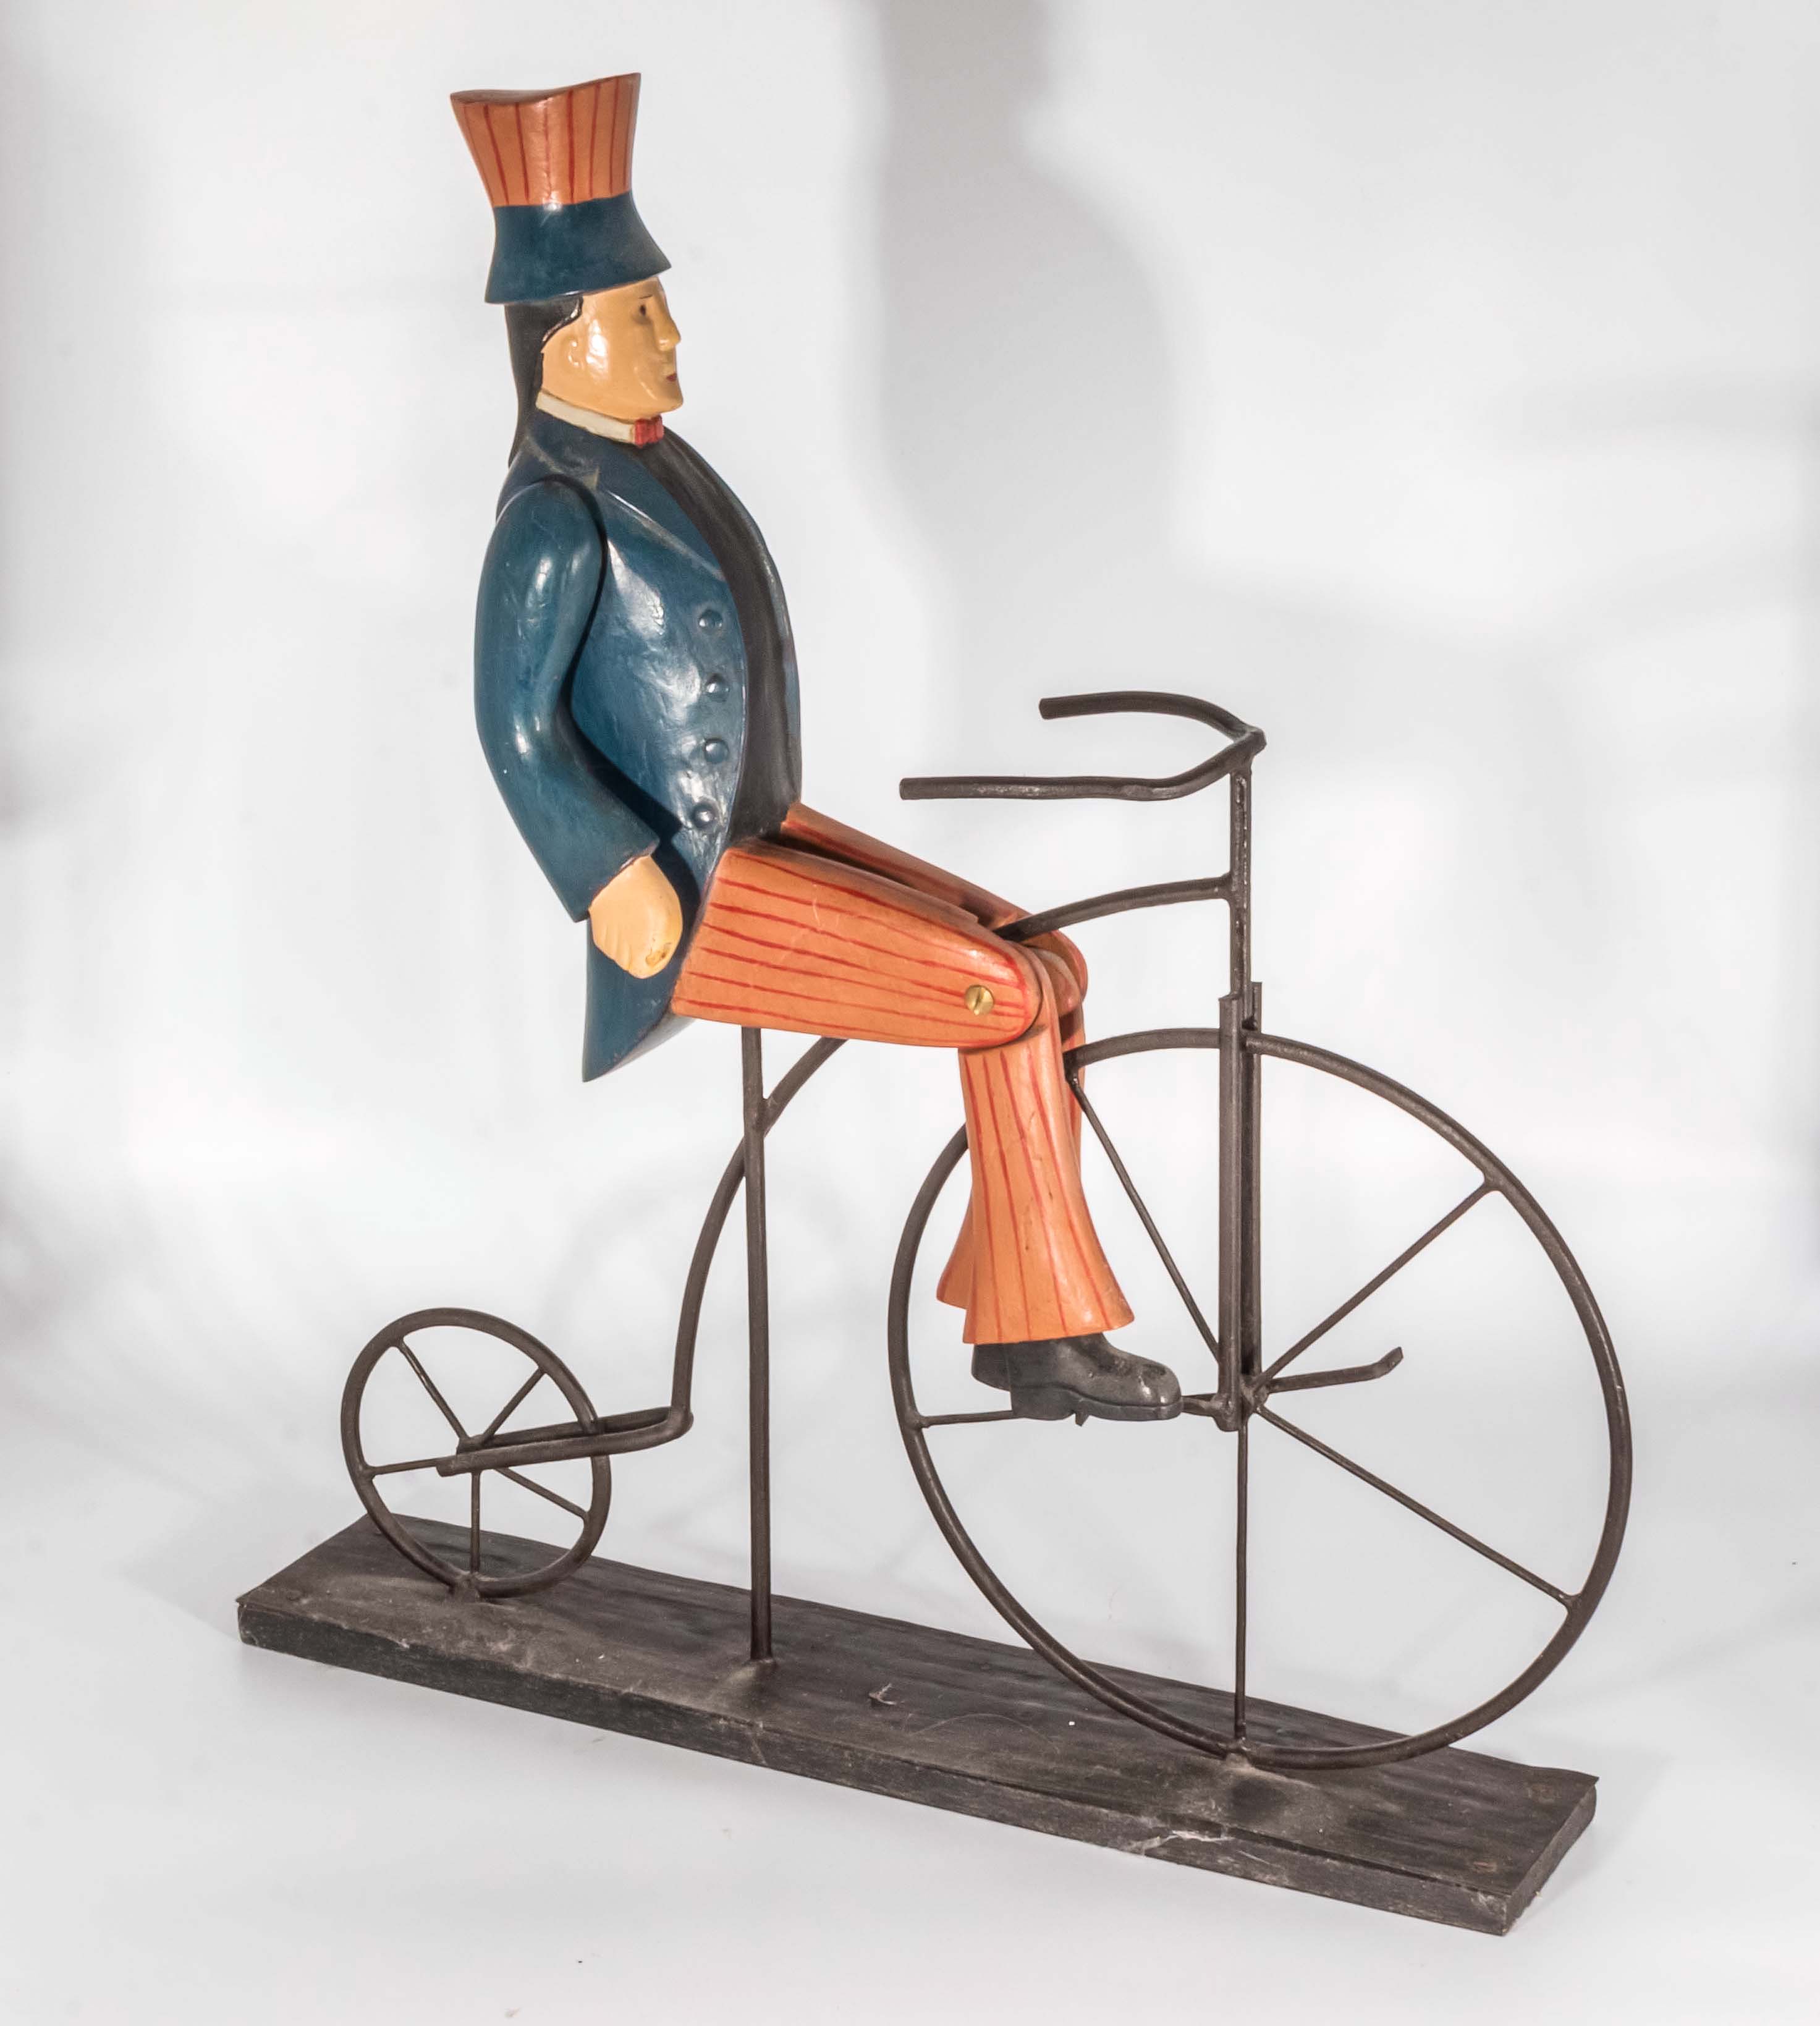 A model of a gentleman riding a penny farthing